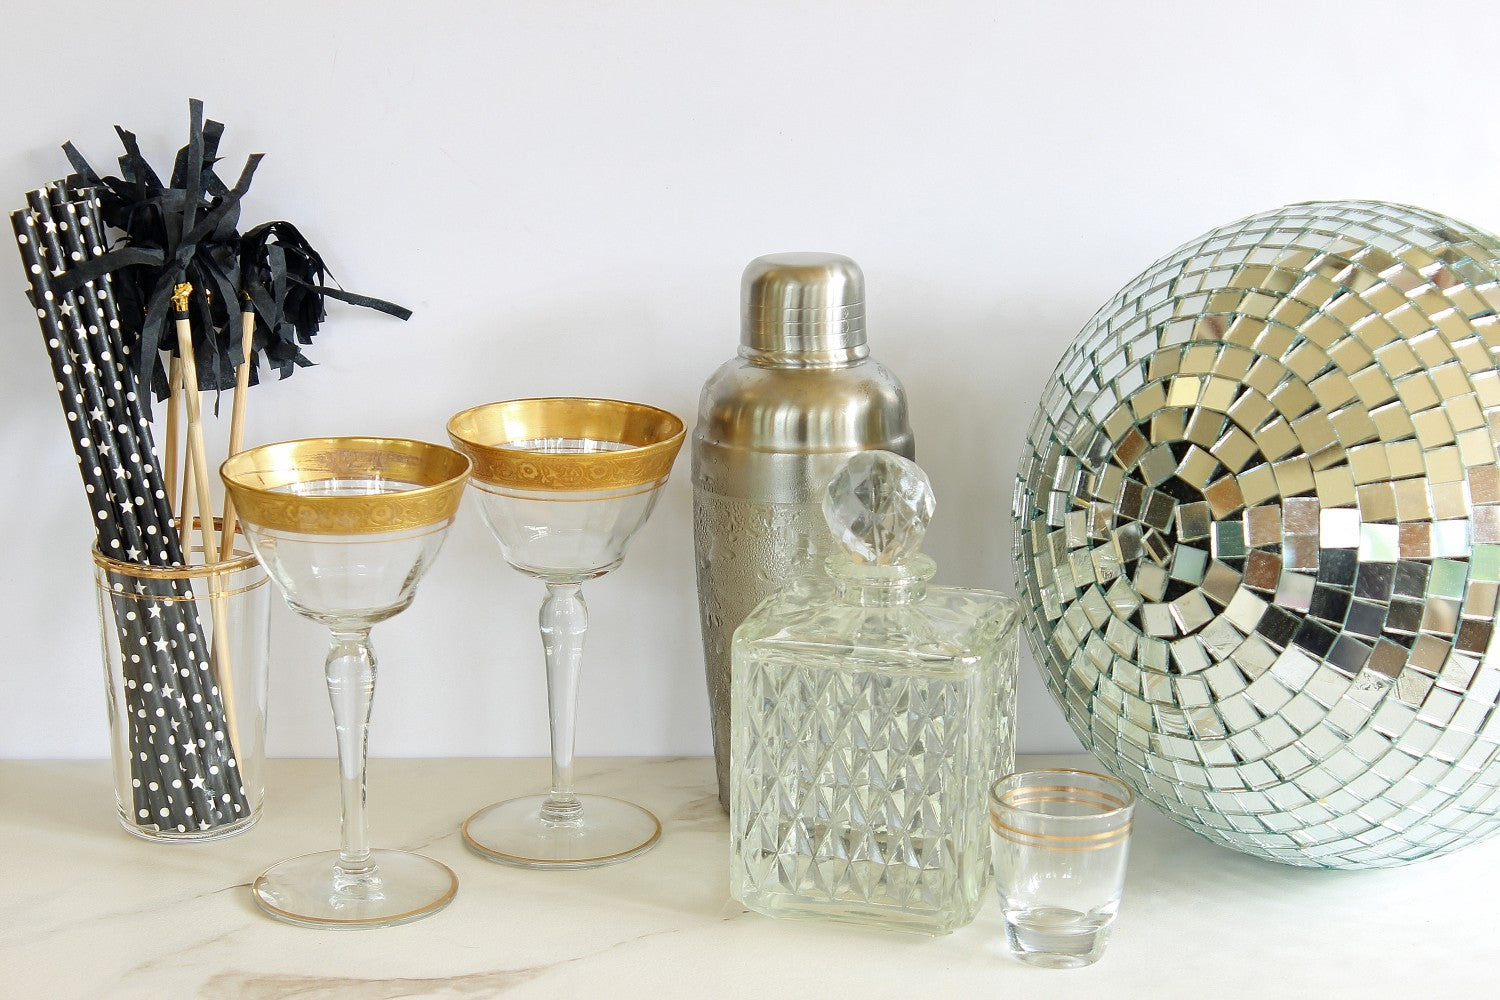 entertaining must haves - drinks